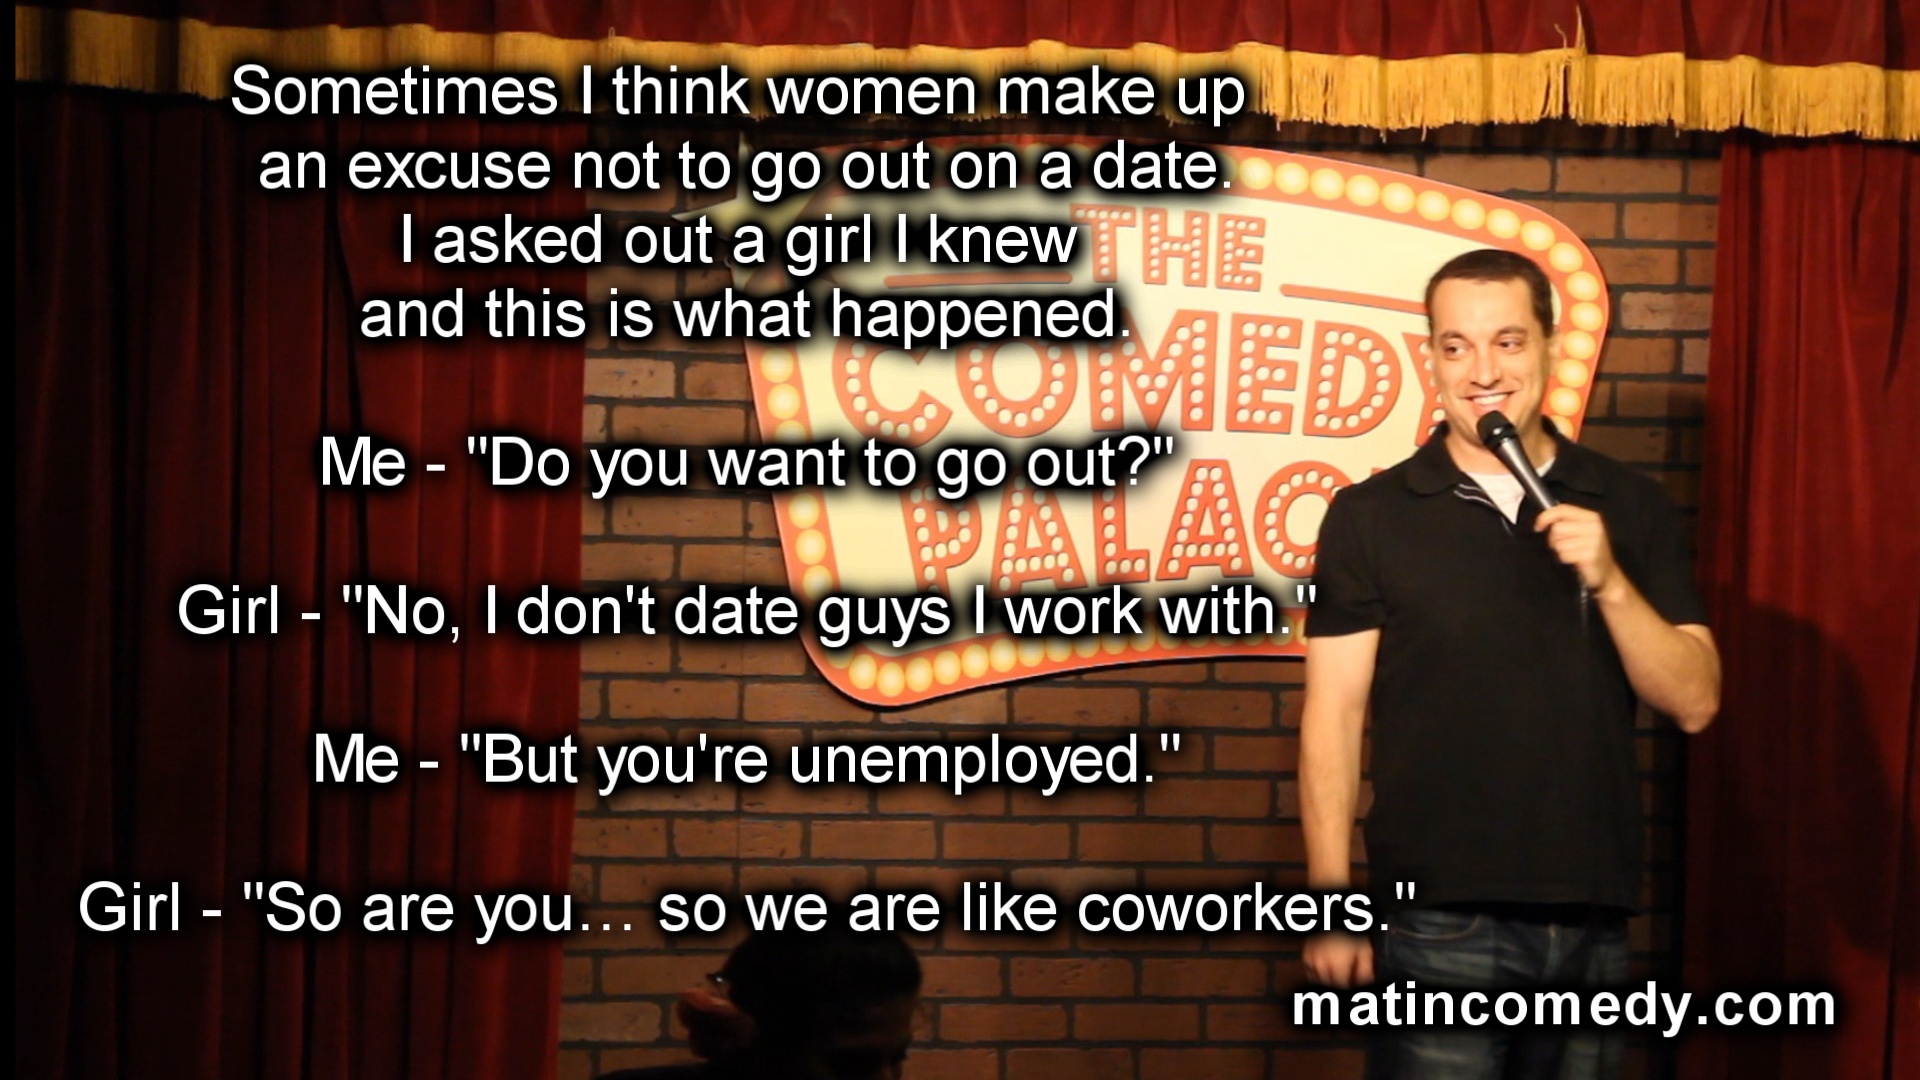 Women Make Up An Excuse NOT To Date